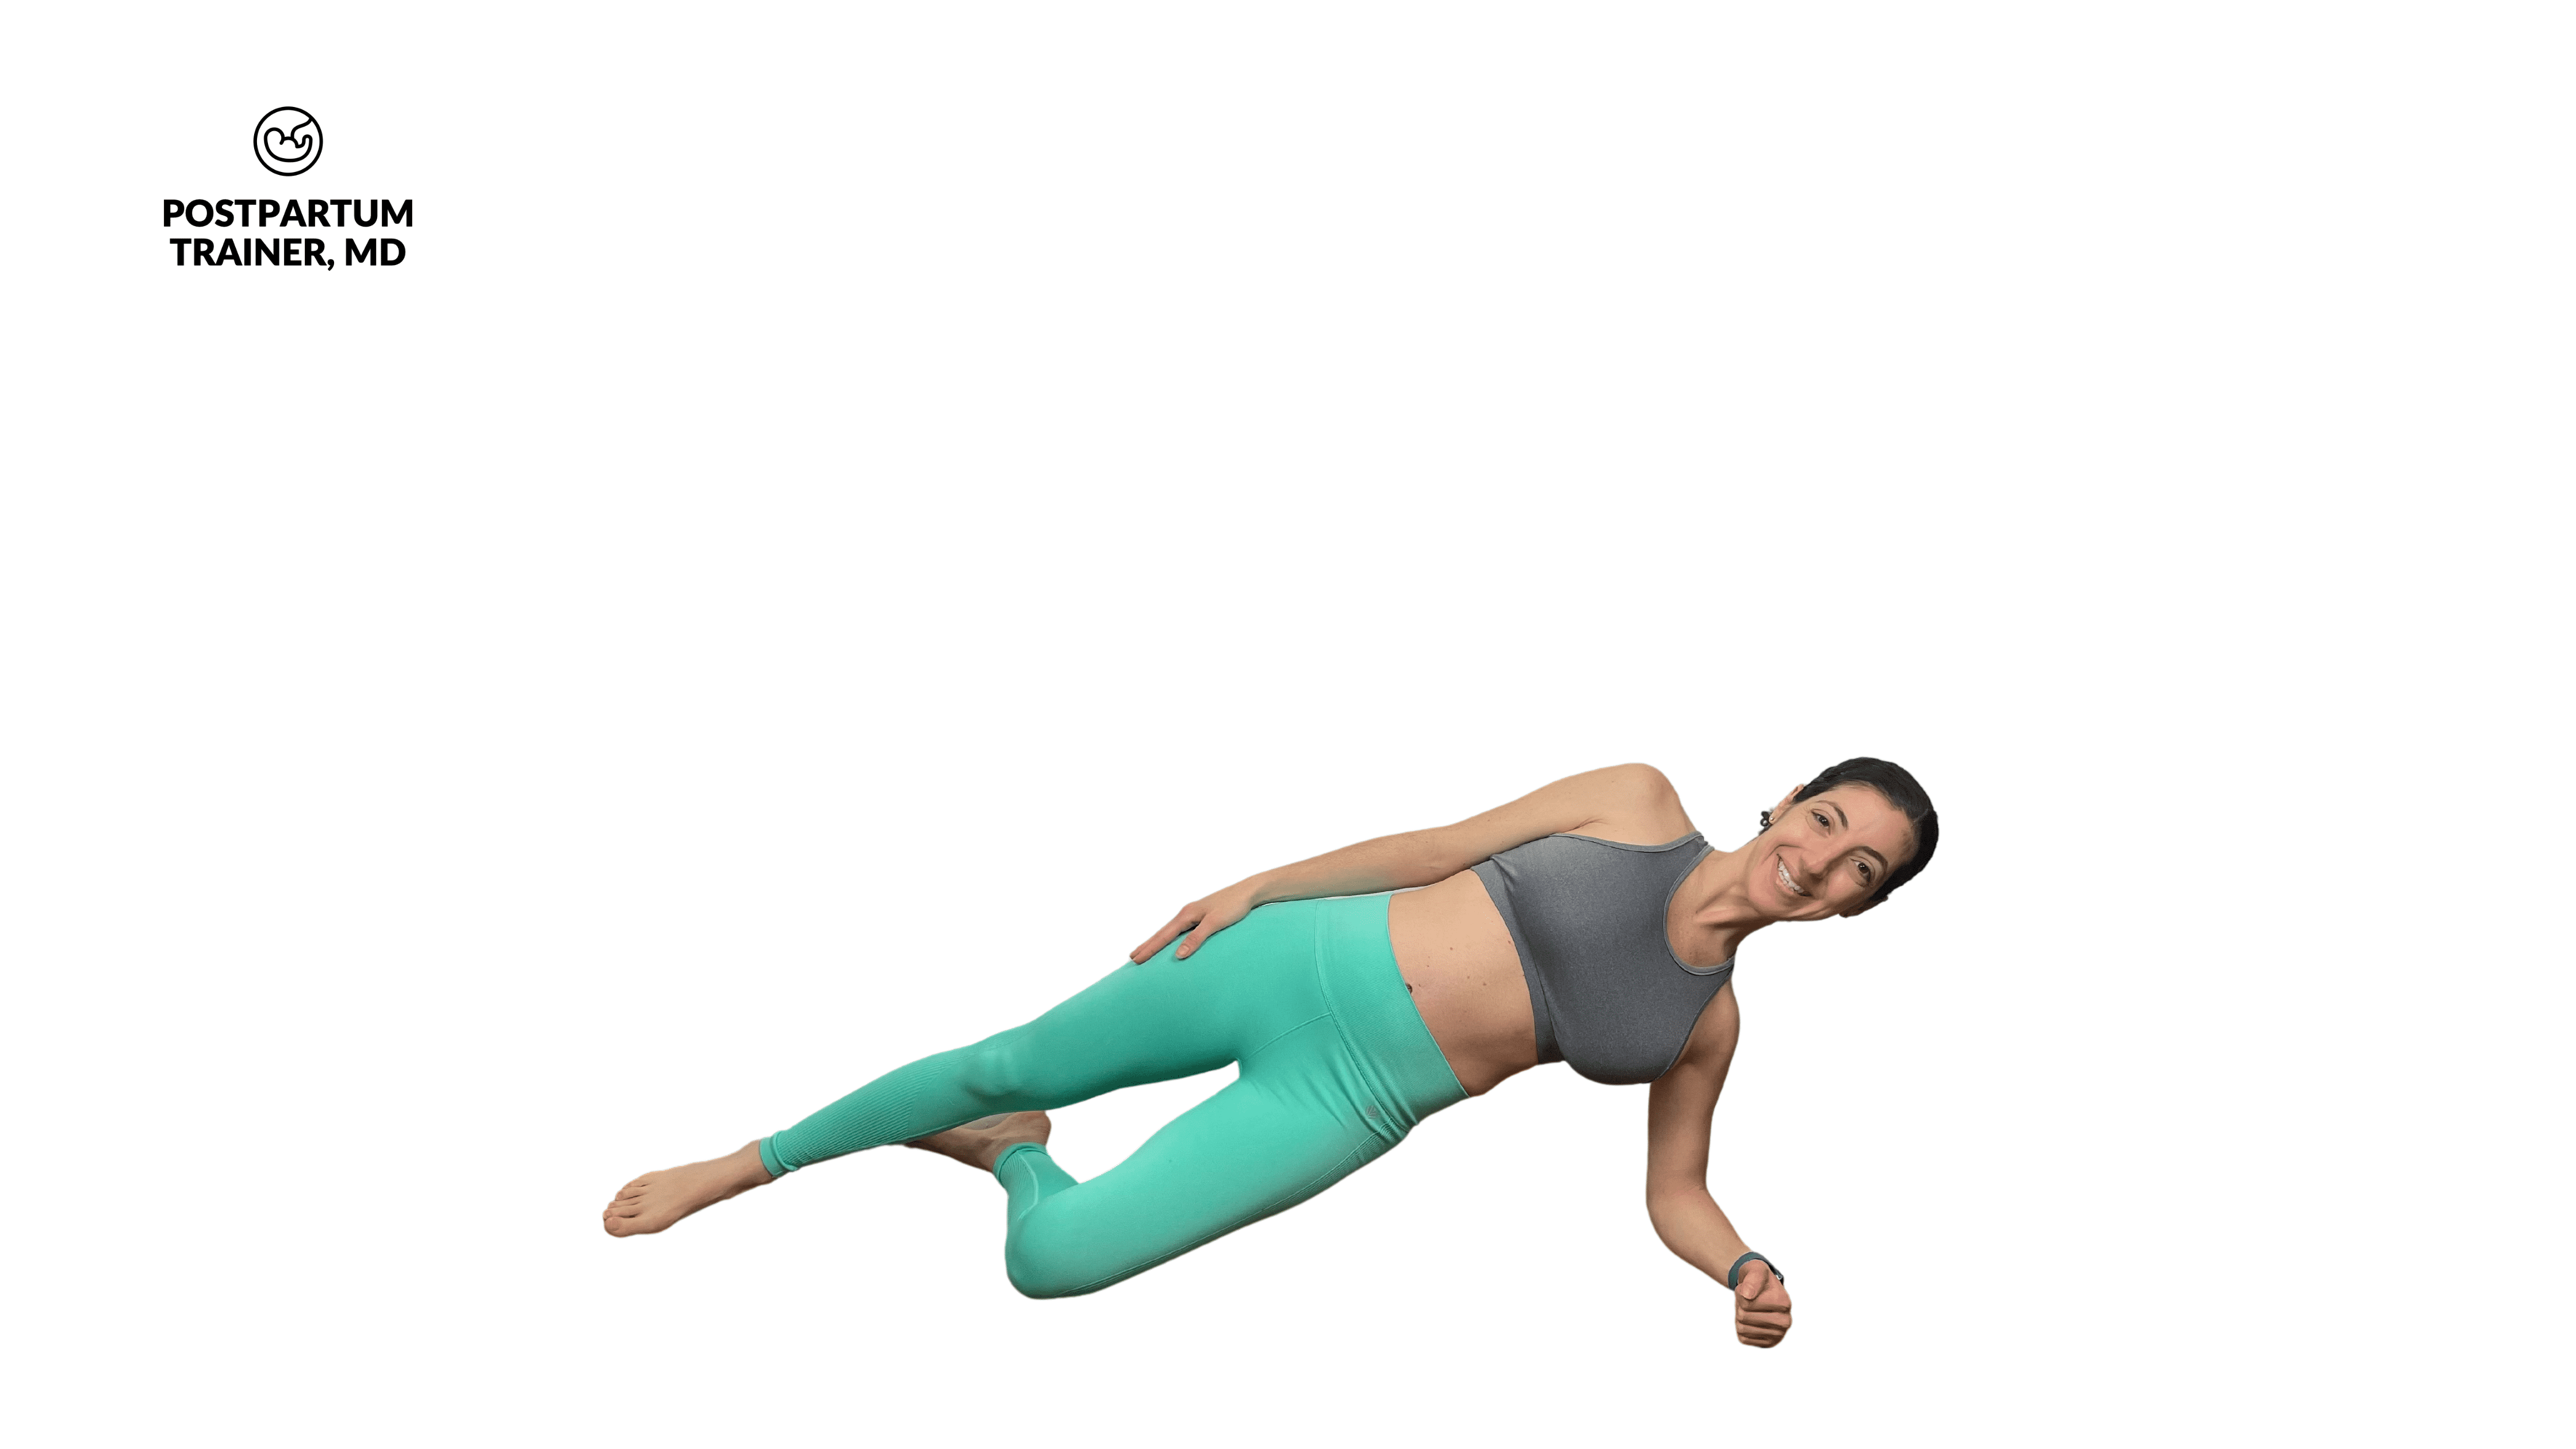 brittany doing a modified side plank in the 2nd-trimester of pregnancy